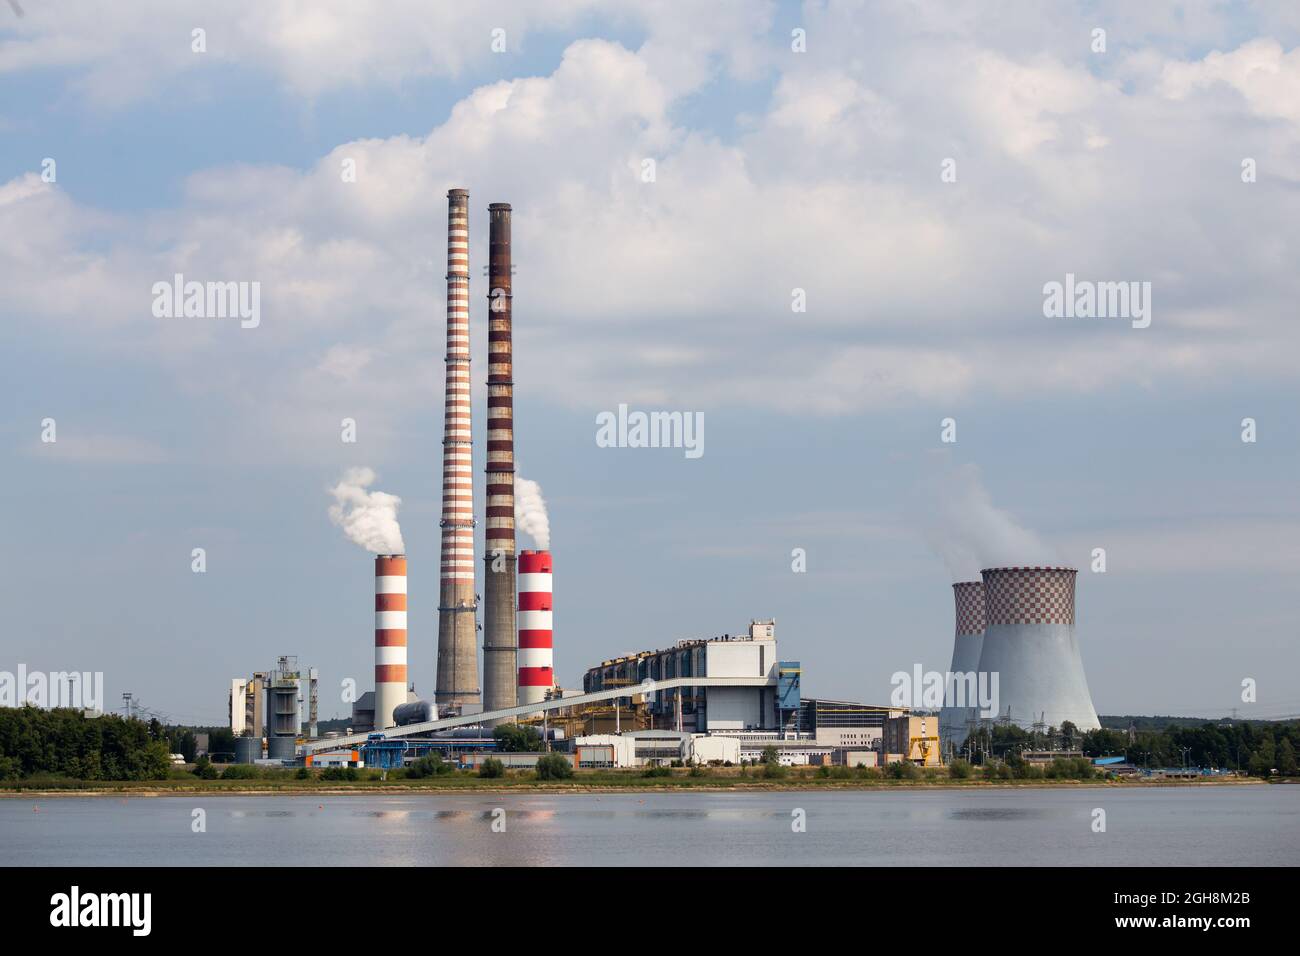 Distant view of the coal-fired power plant. Photo taken on a sunny day with good lighting conditions. Stock Photo